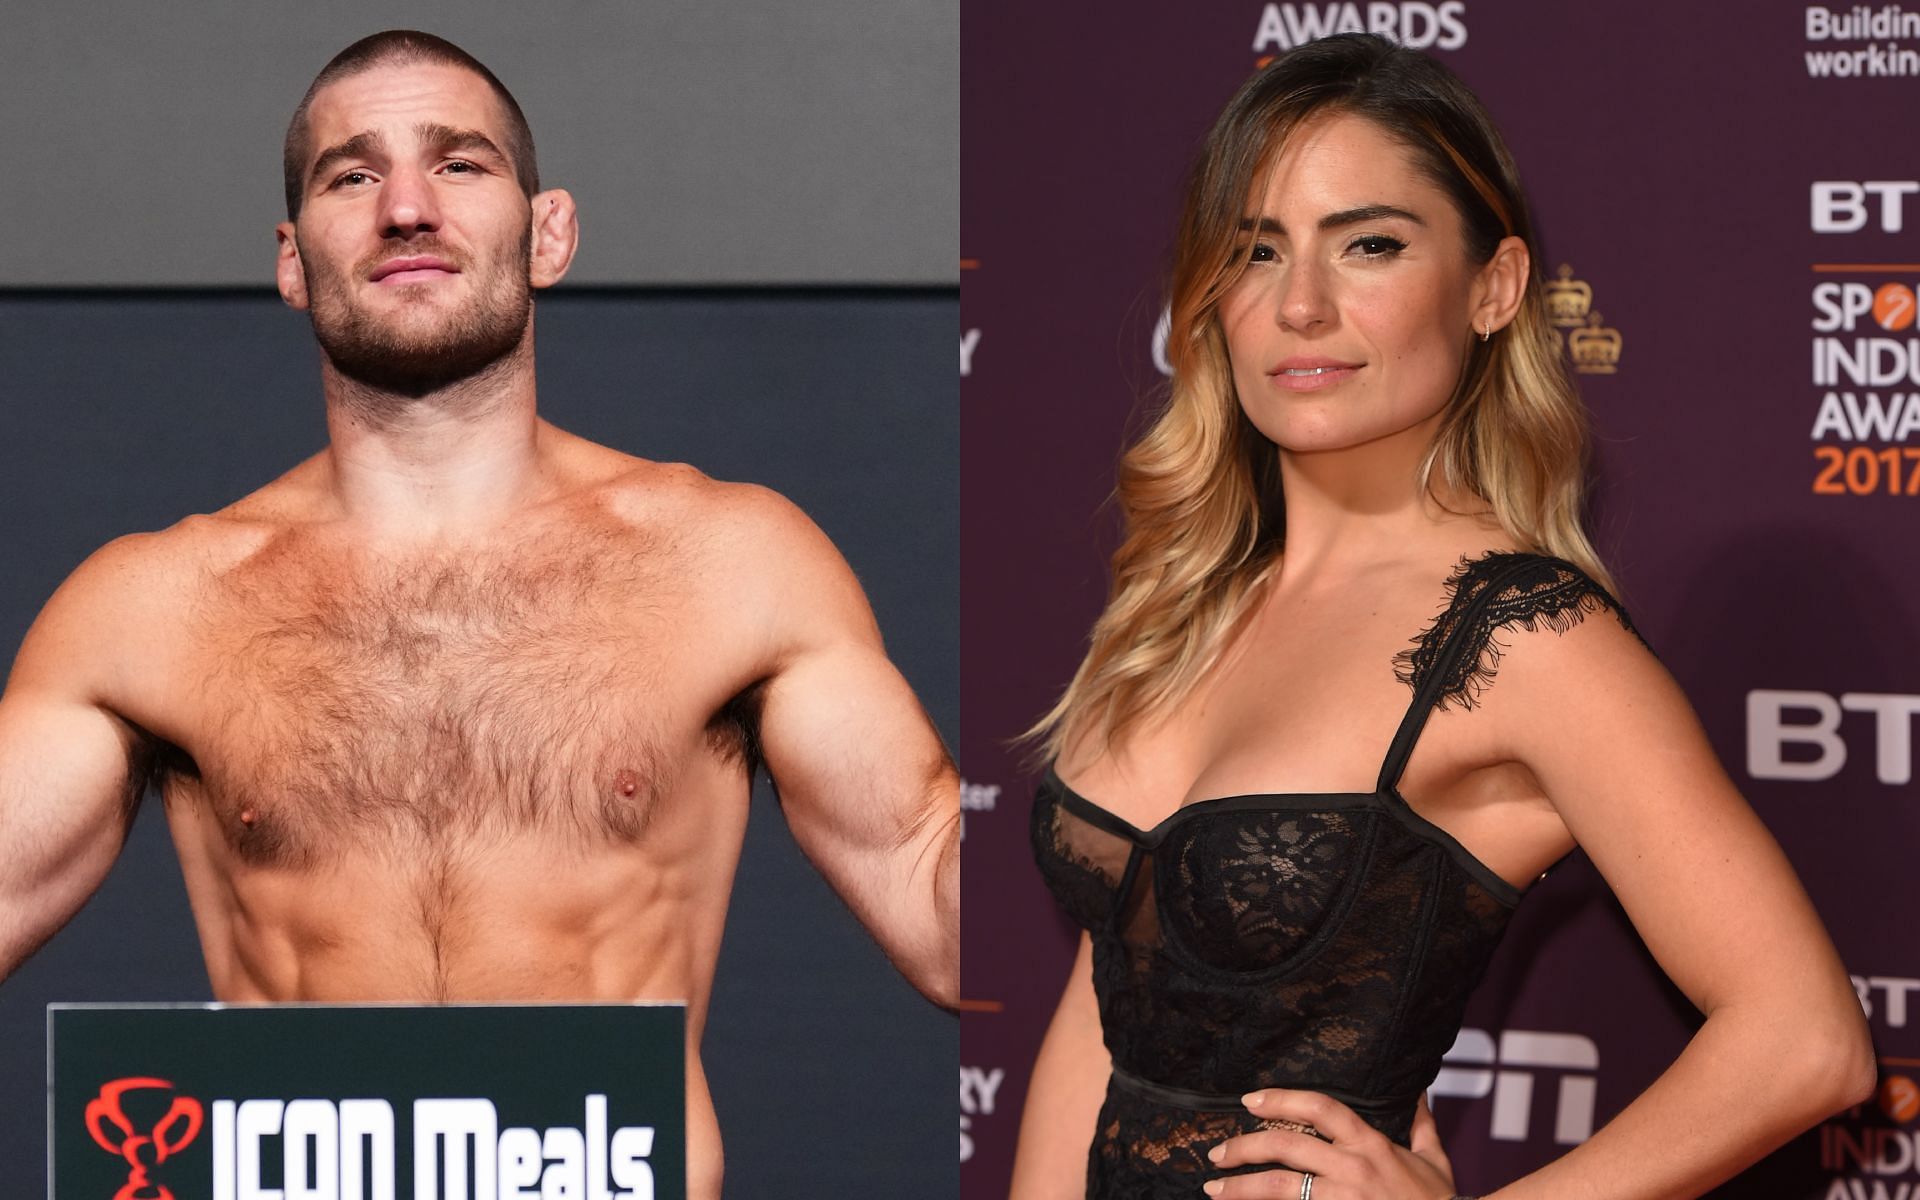 Sean Strickland (left) fires back at Layla Machado Garry (right) [Image via: Getty Images] 